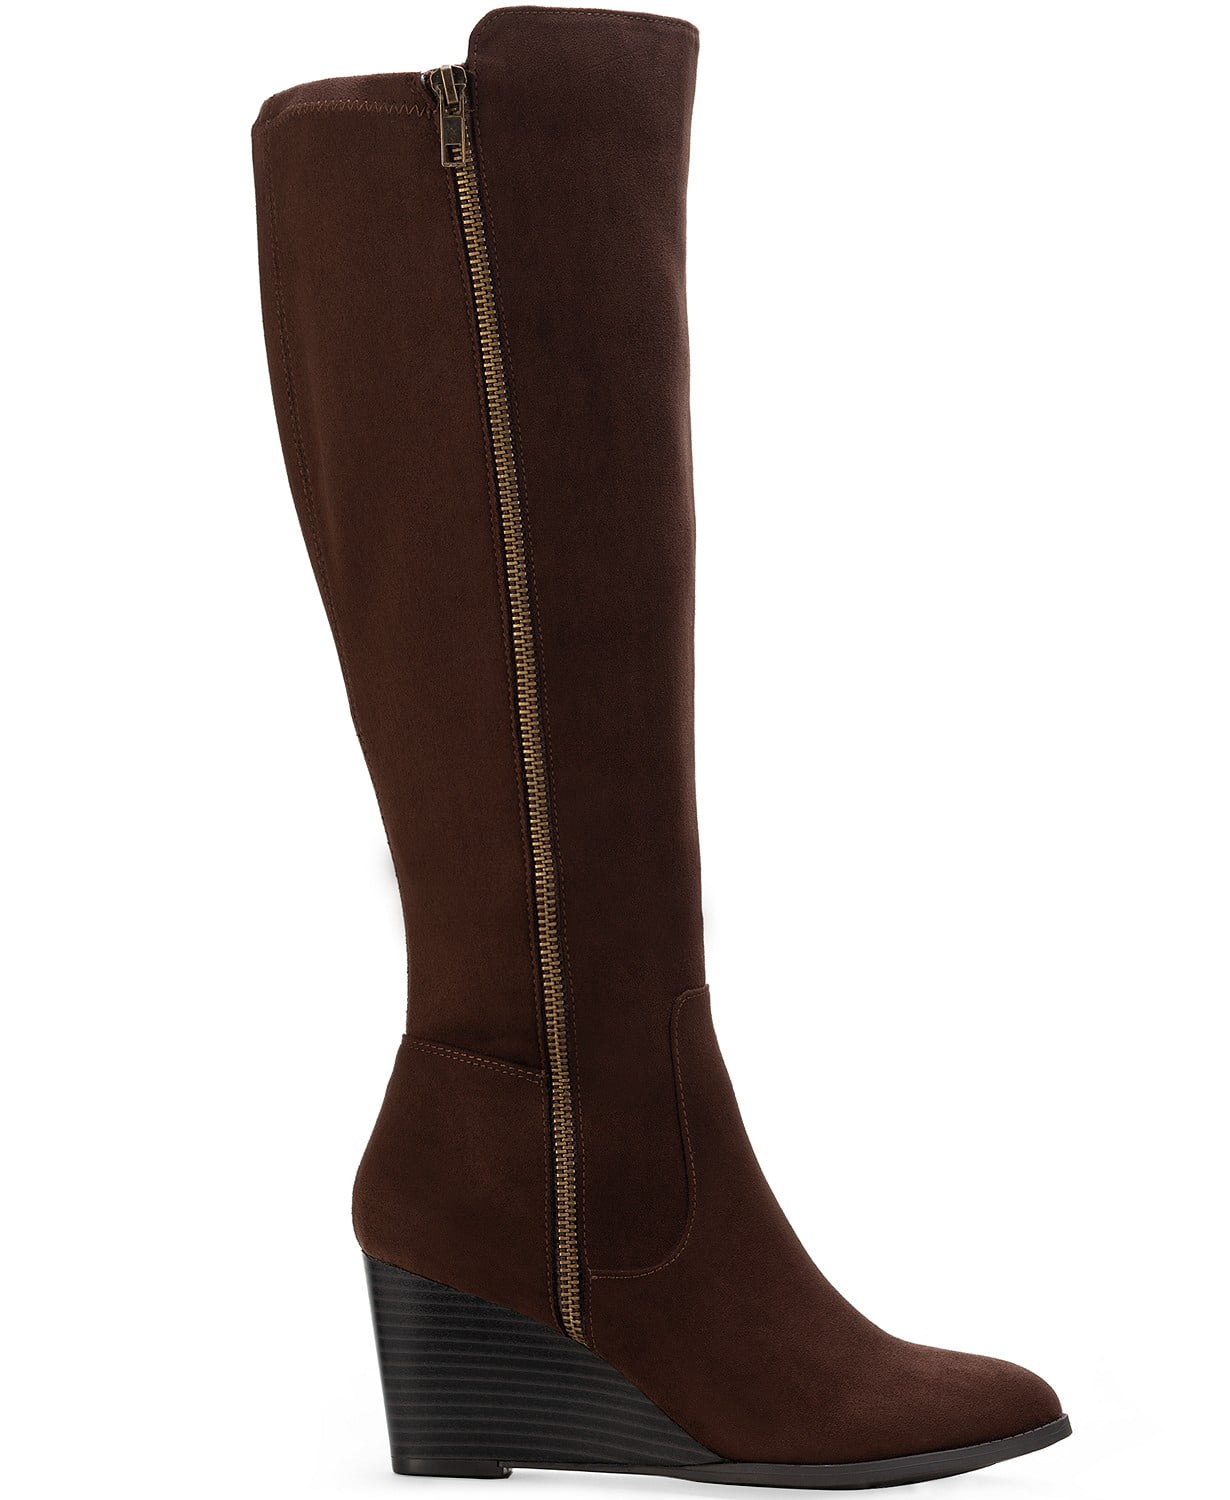 woocommerce-673321-2209615.cloudwaysapps.com-style-amp-co-womens-brown-wynterr-wedge-dress-boots